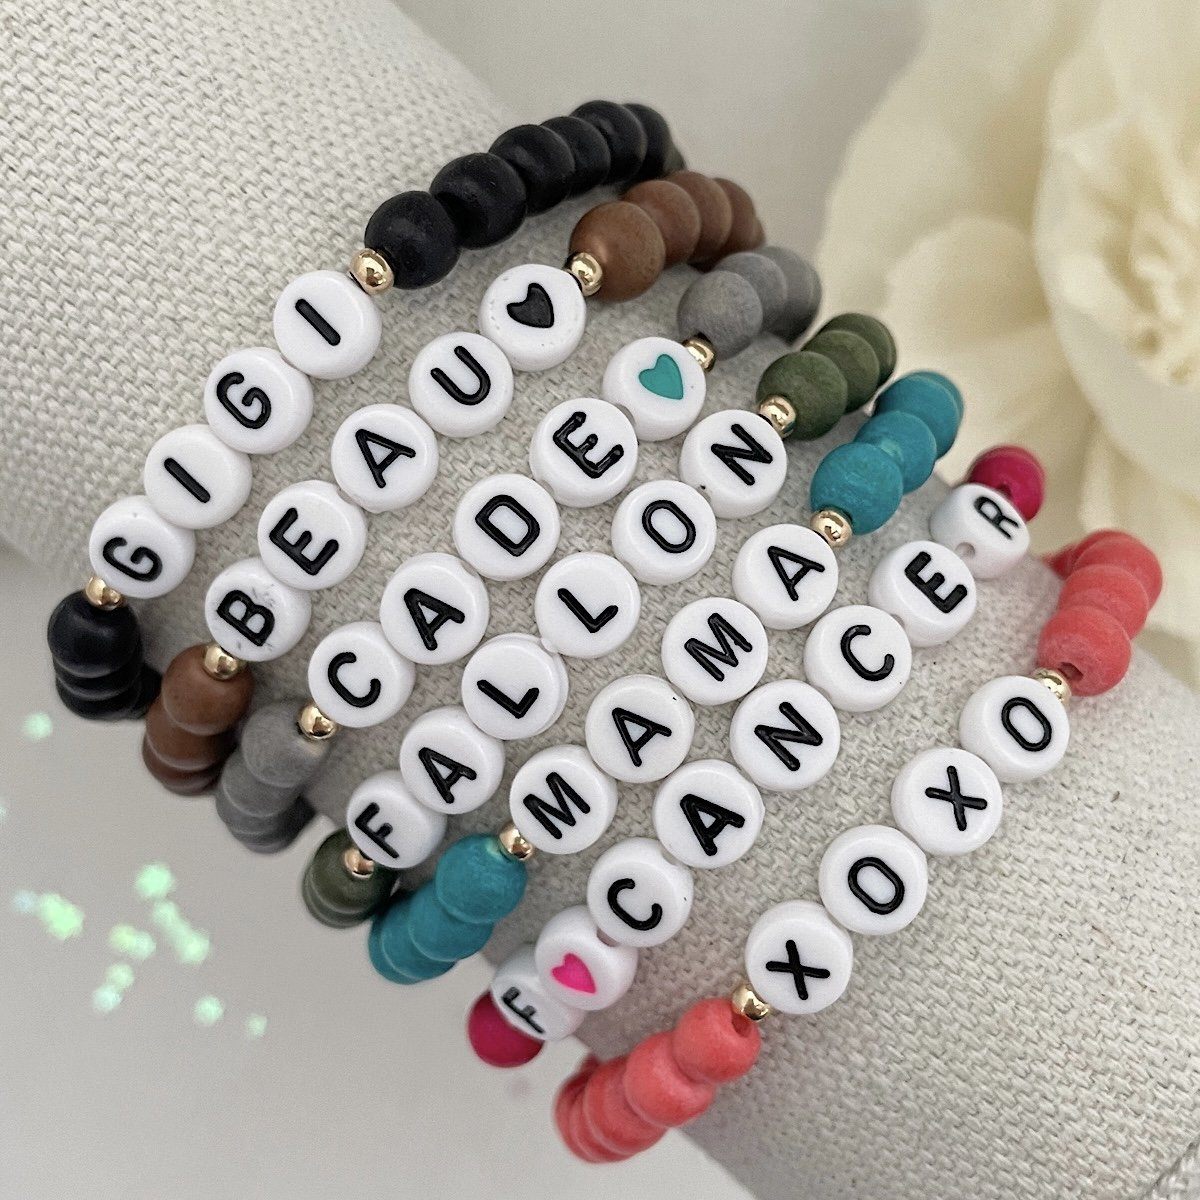 Colorful Personalized Name or Word Beaded Stretch Bracelet. 10 Letters Max